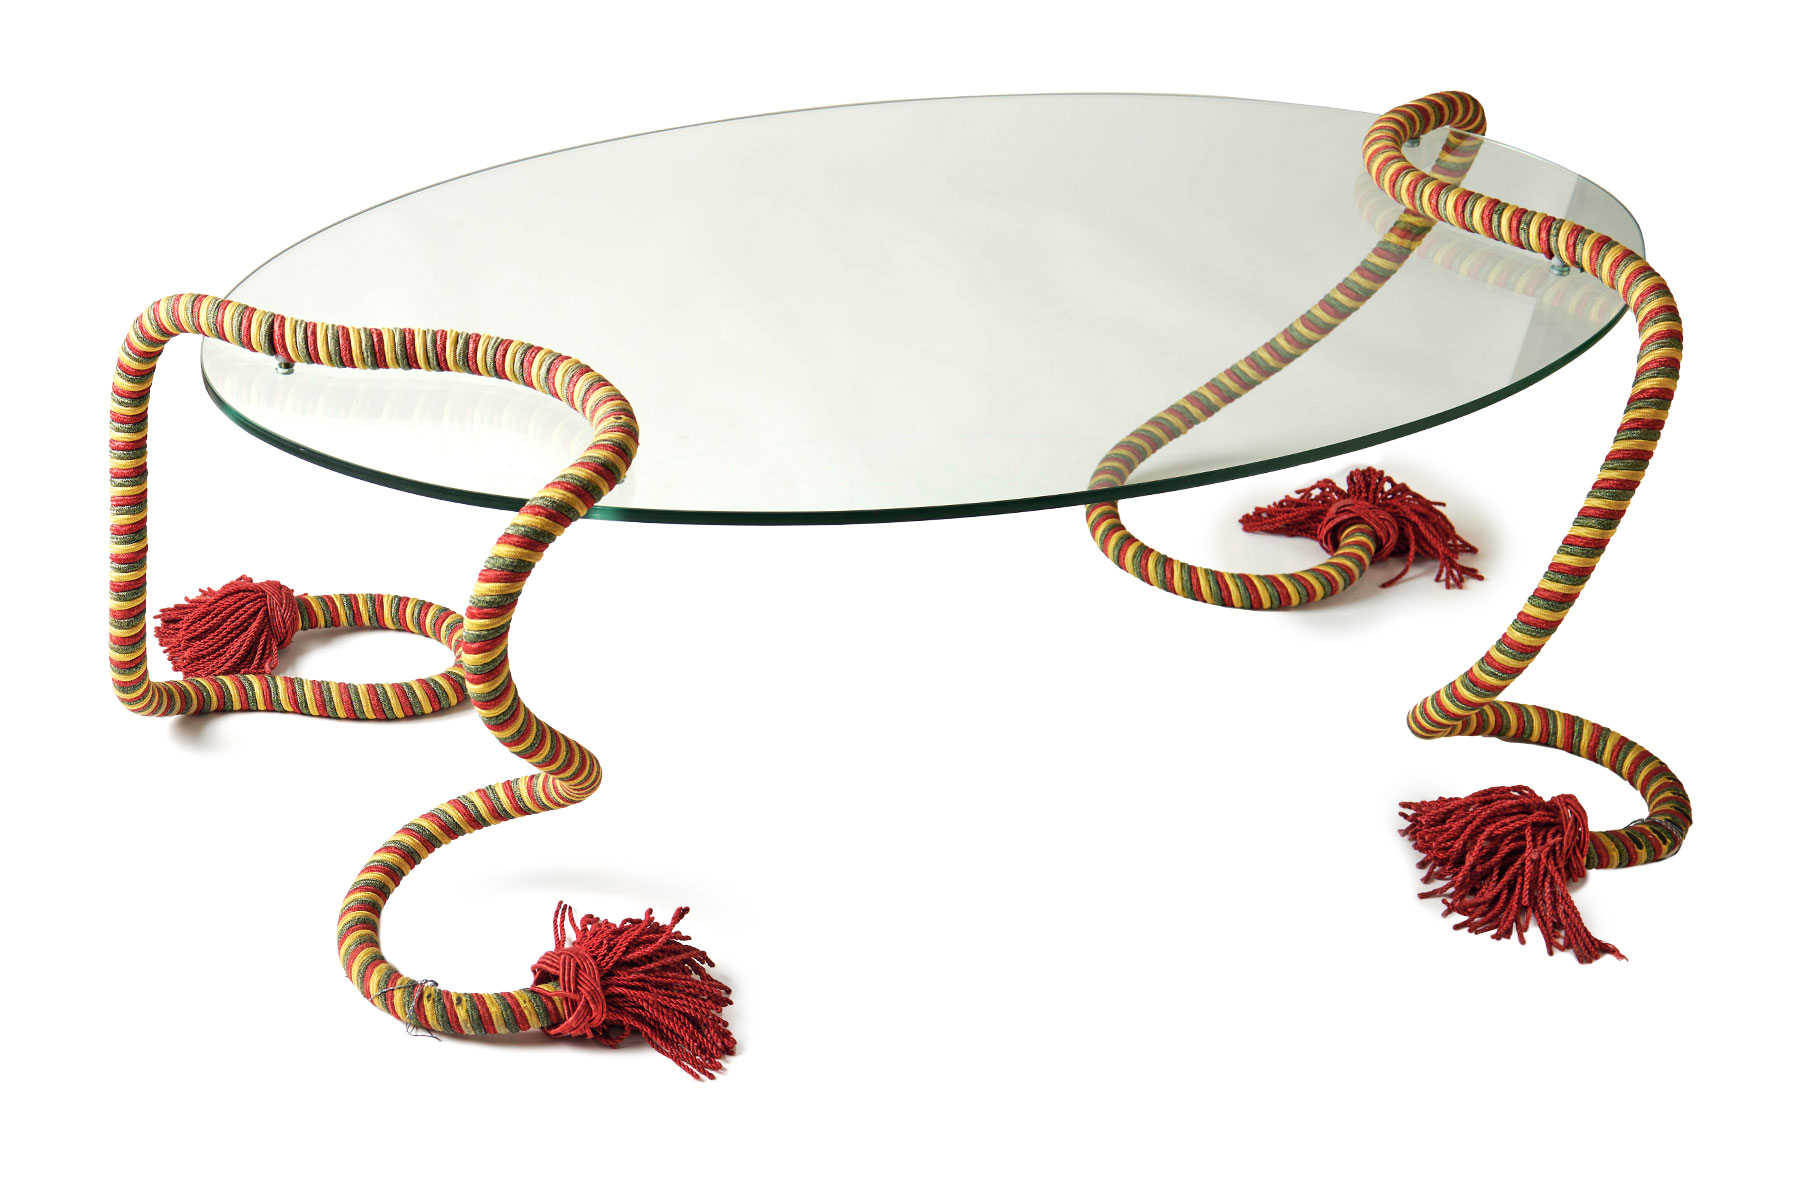 Vintage Rope Coffee Table from Scout Design Studio